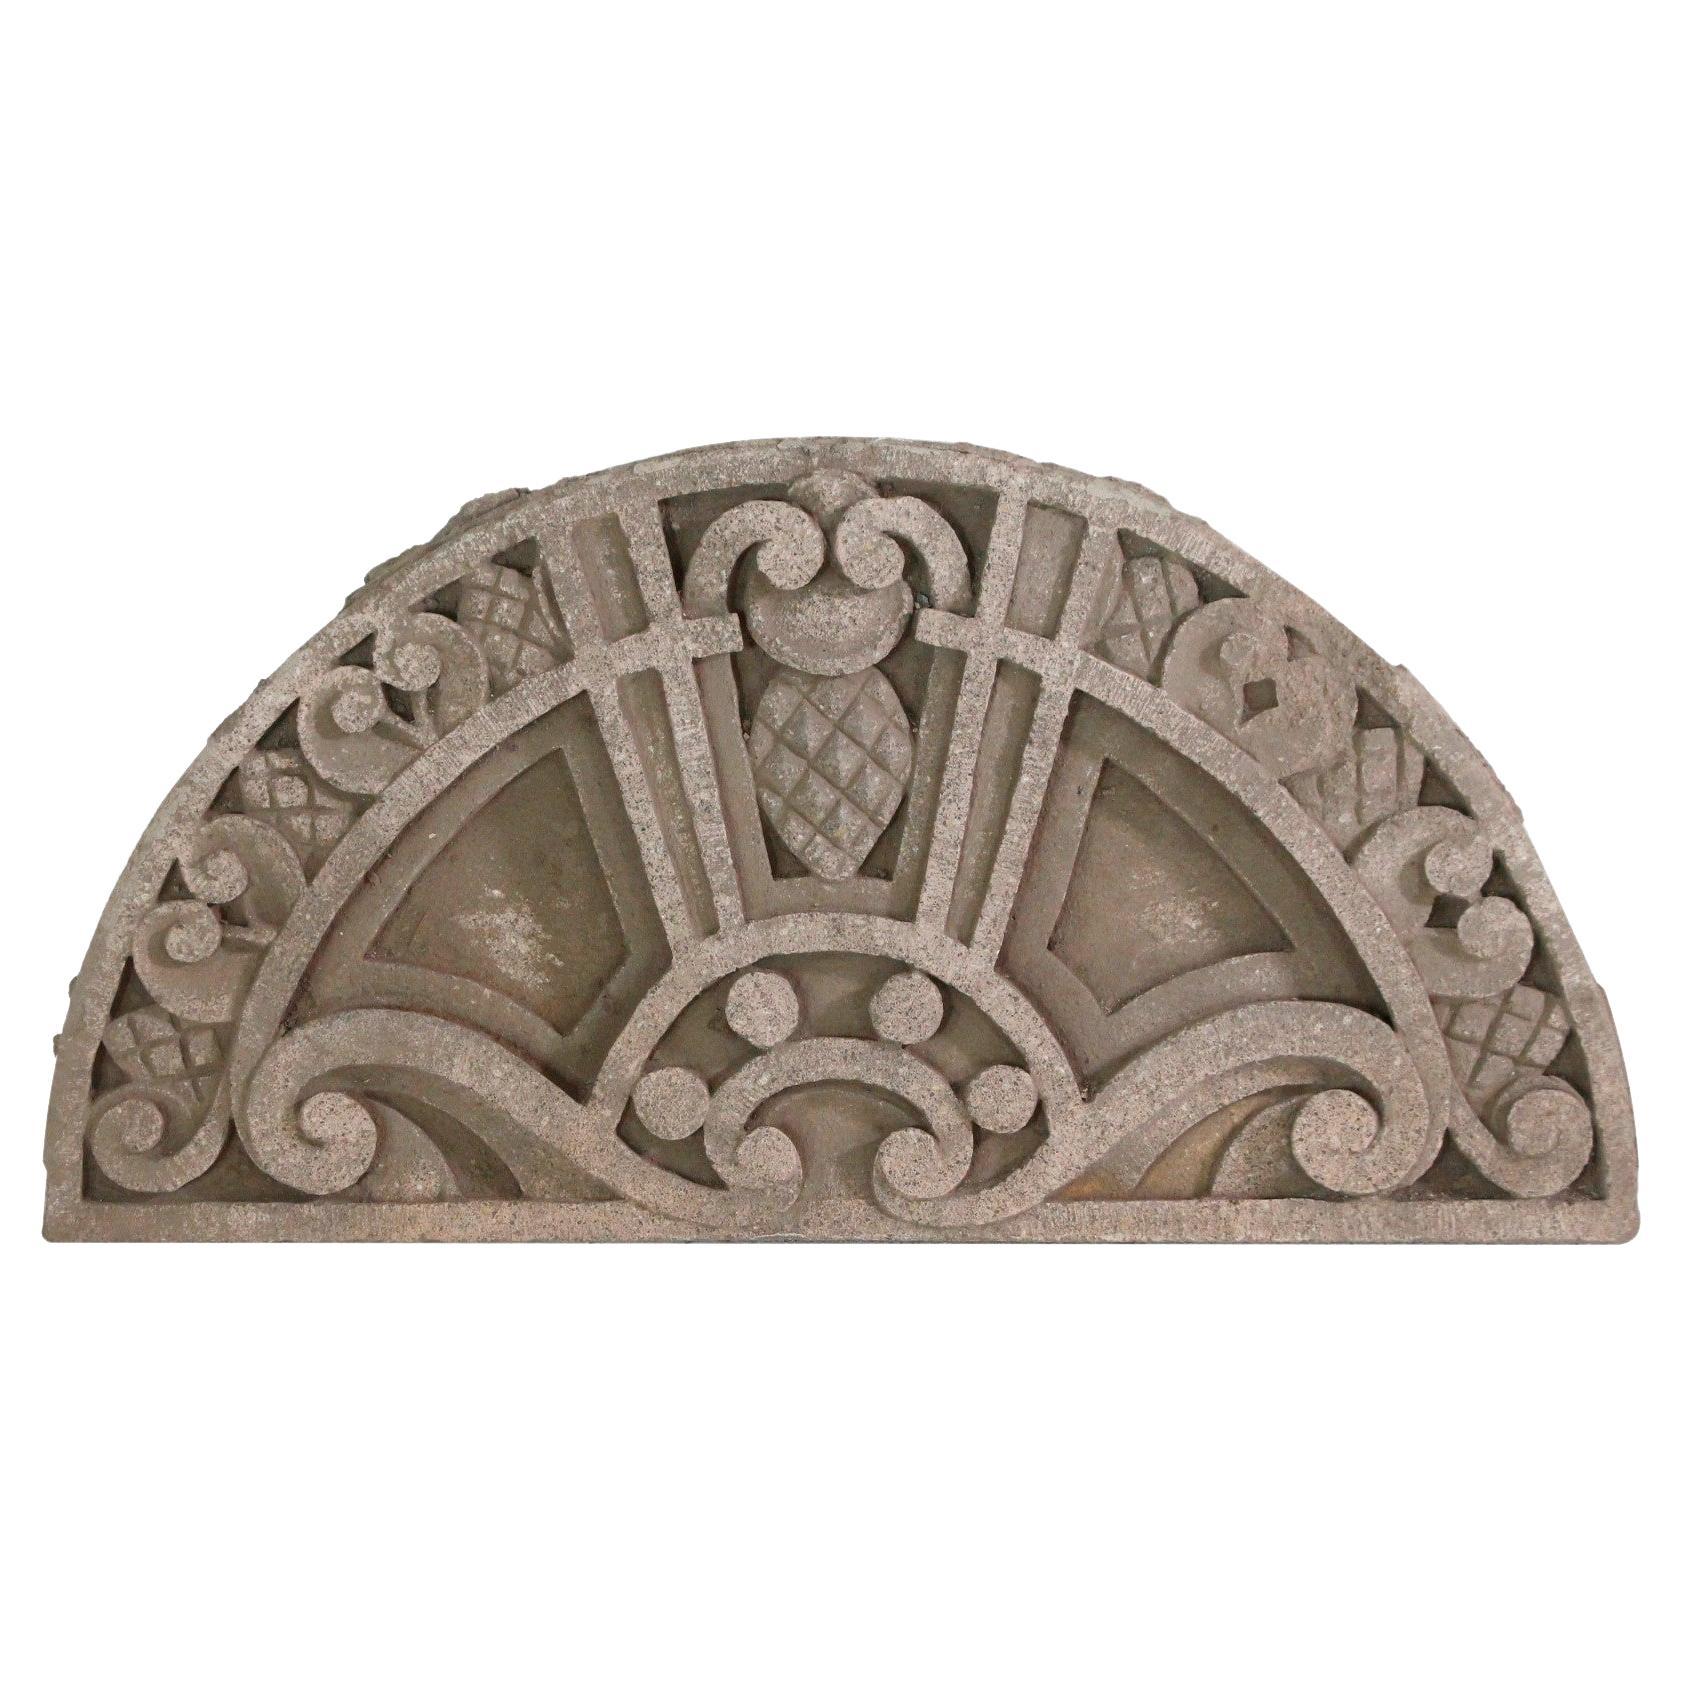 Arched Limestone Transom W/ Carved Pineapple Design circa 1900